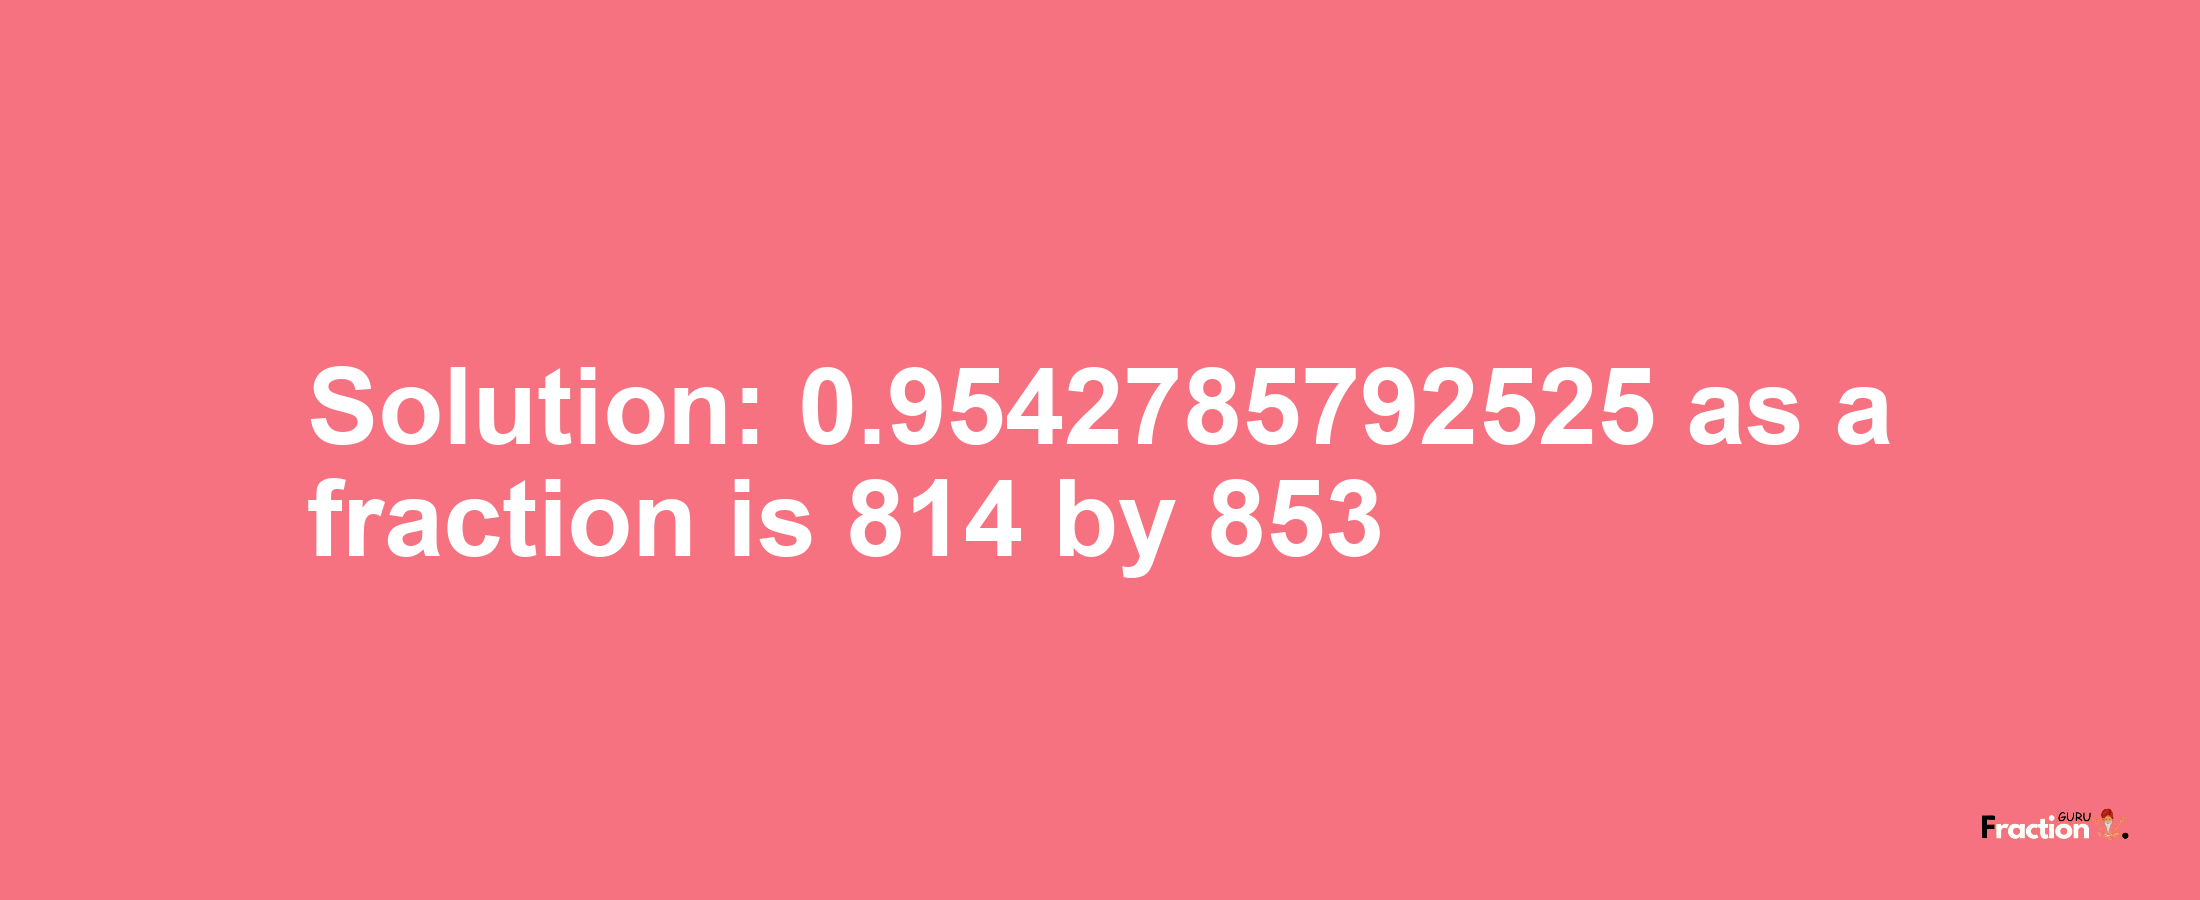 Solution:0.9542785792525 as a fraction is 814/853